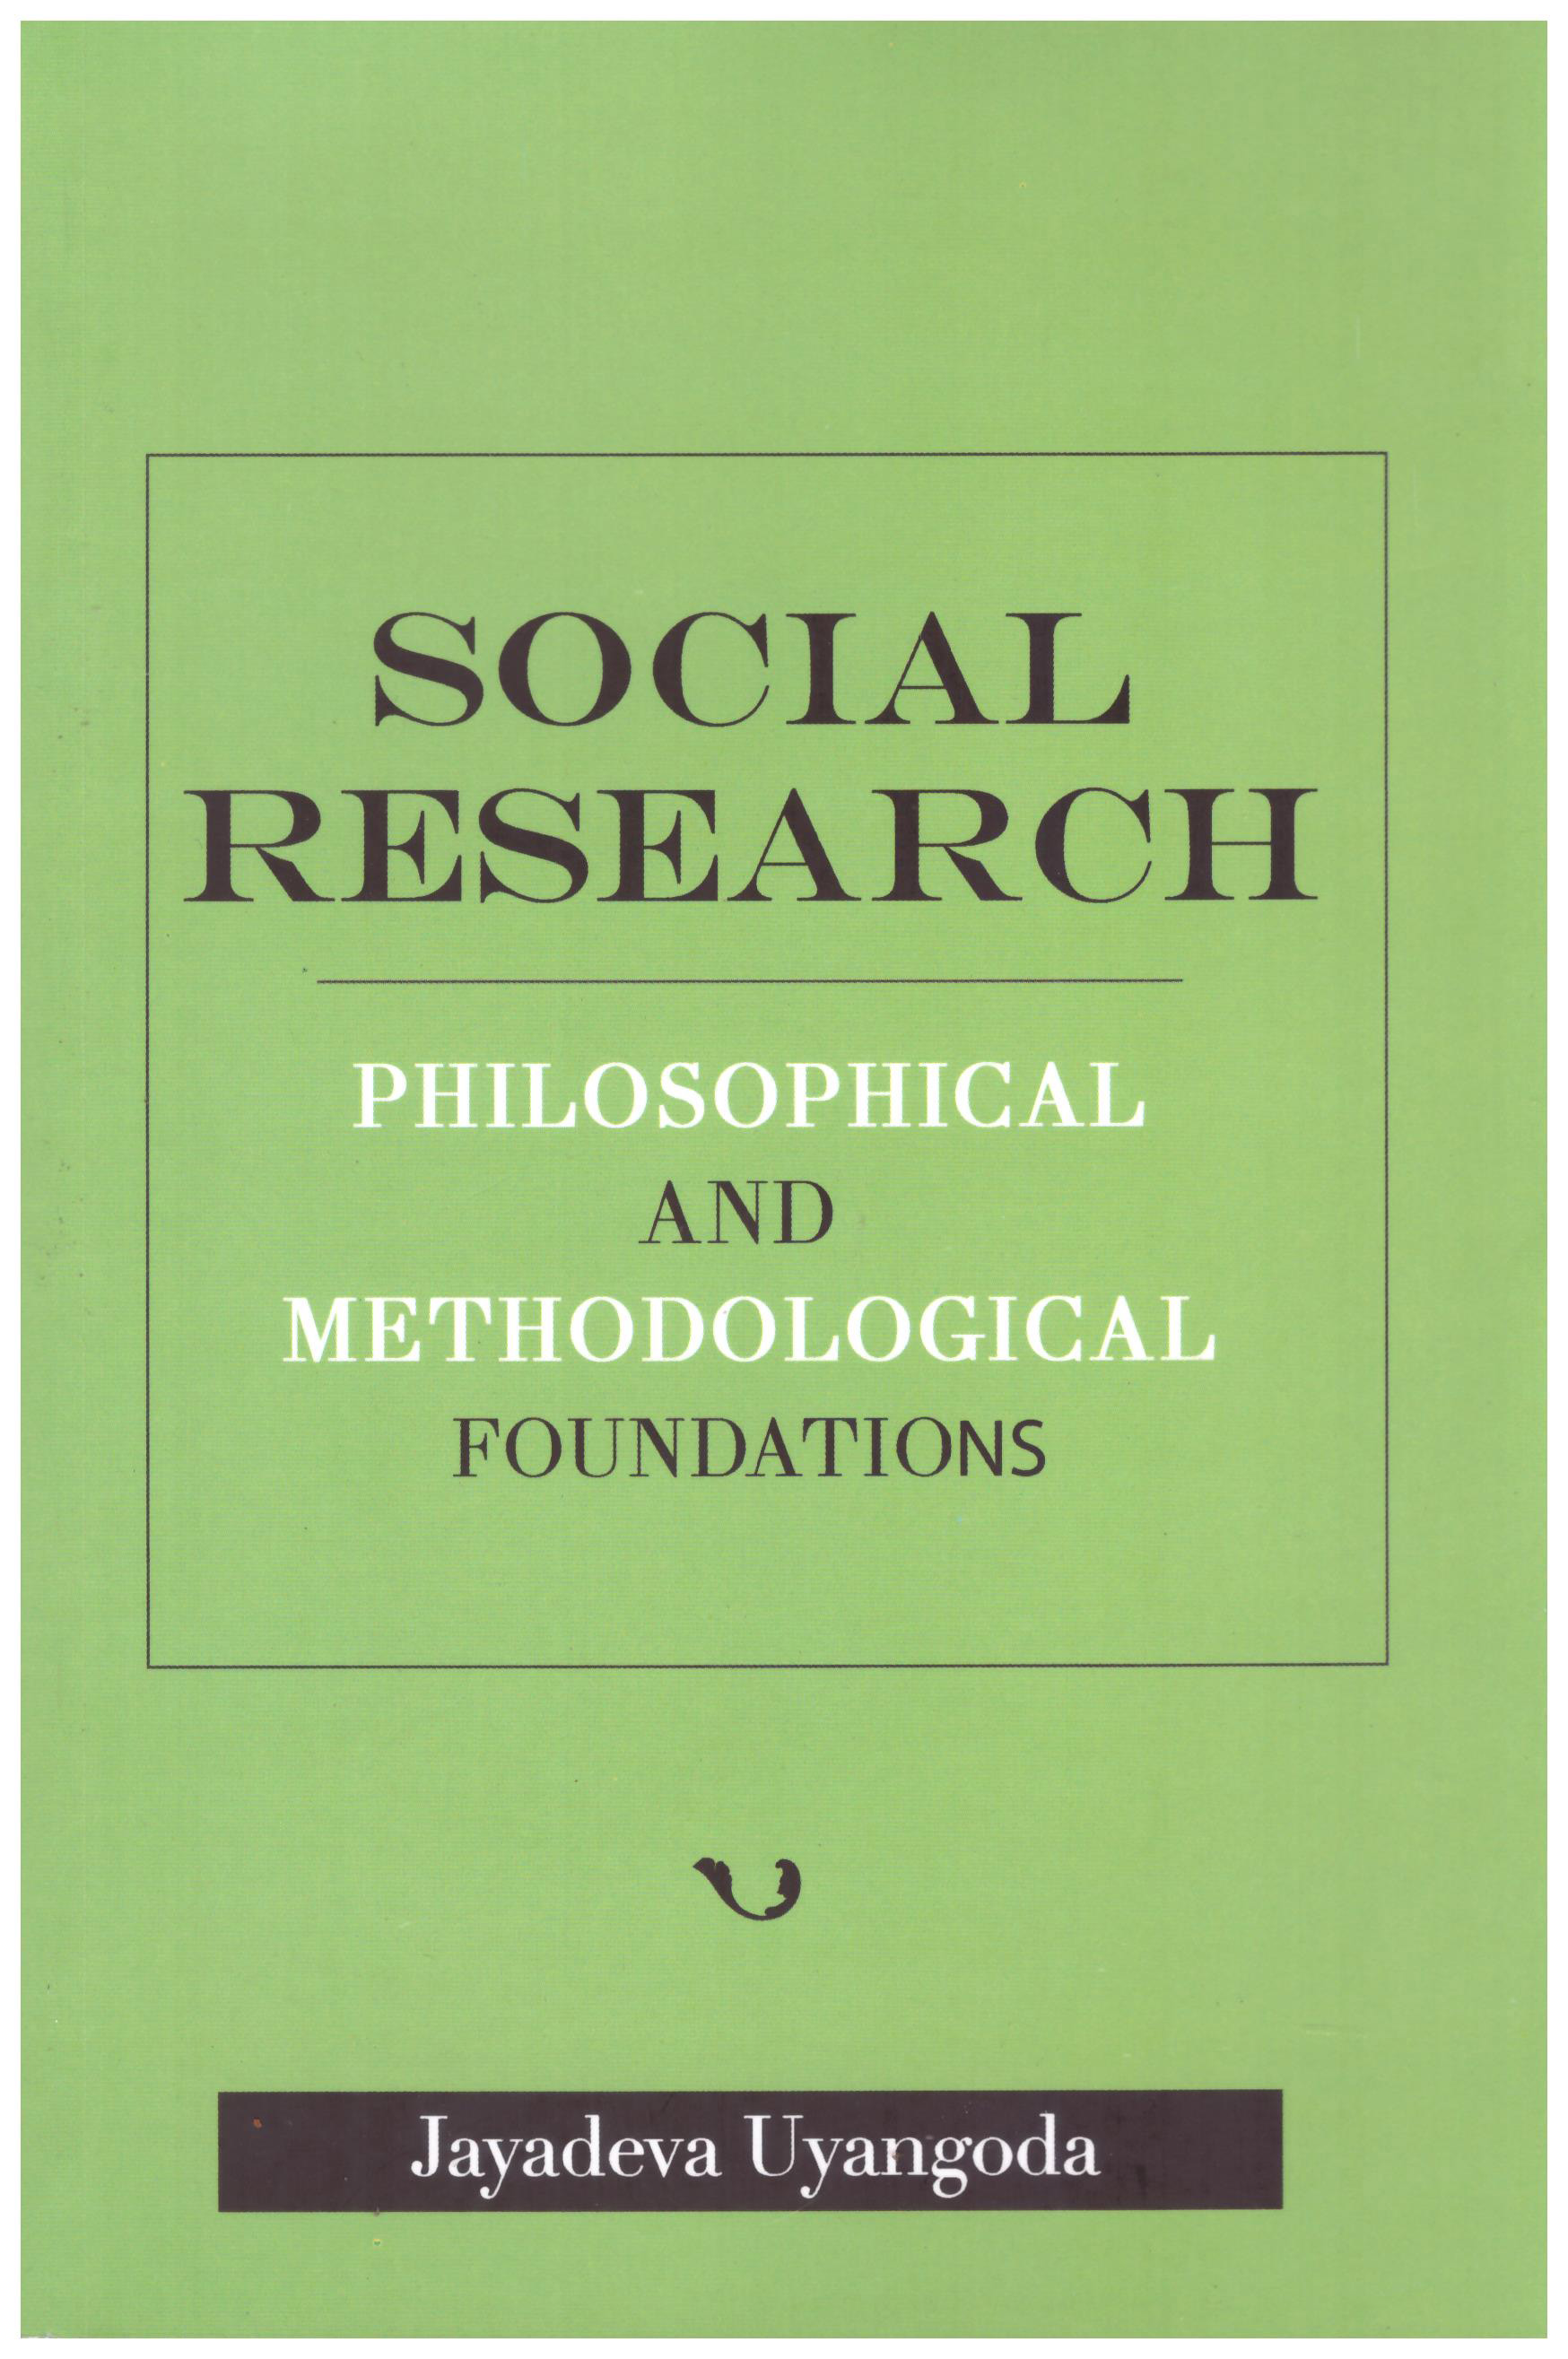 Social Research Philosophical and Methodological Foundations